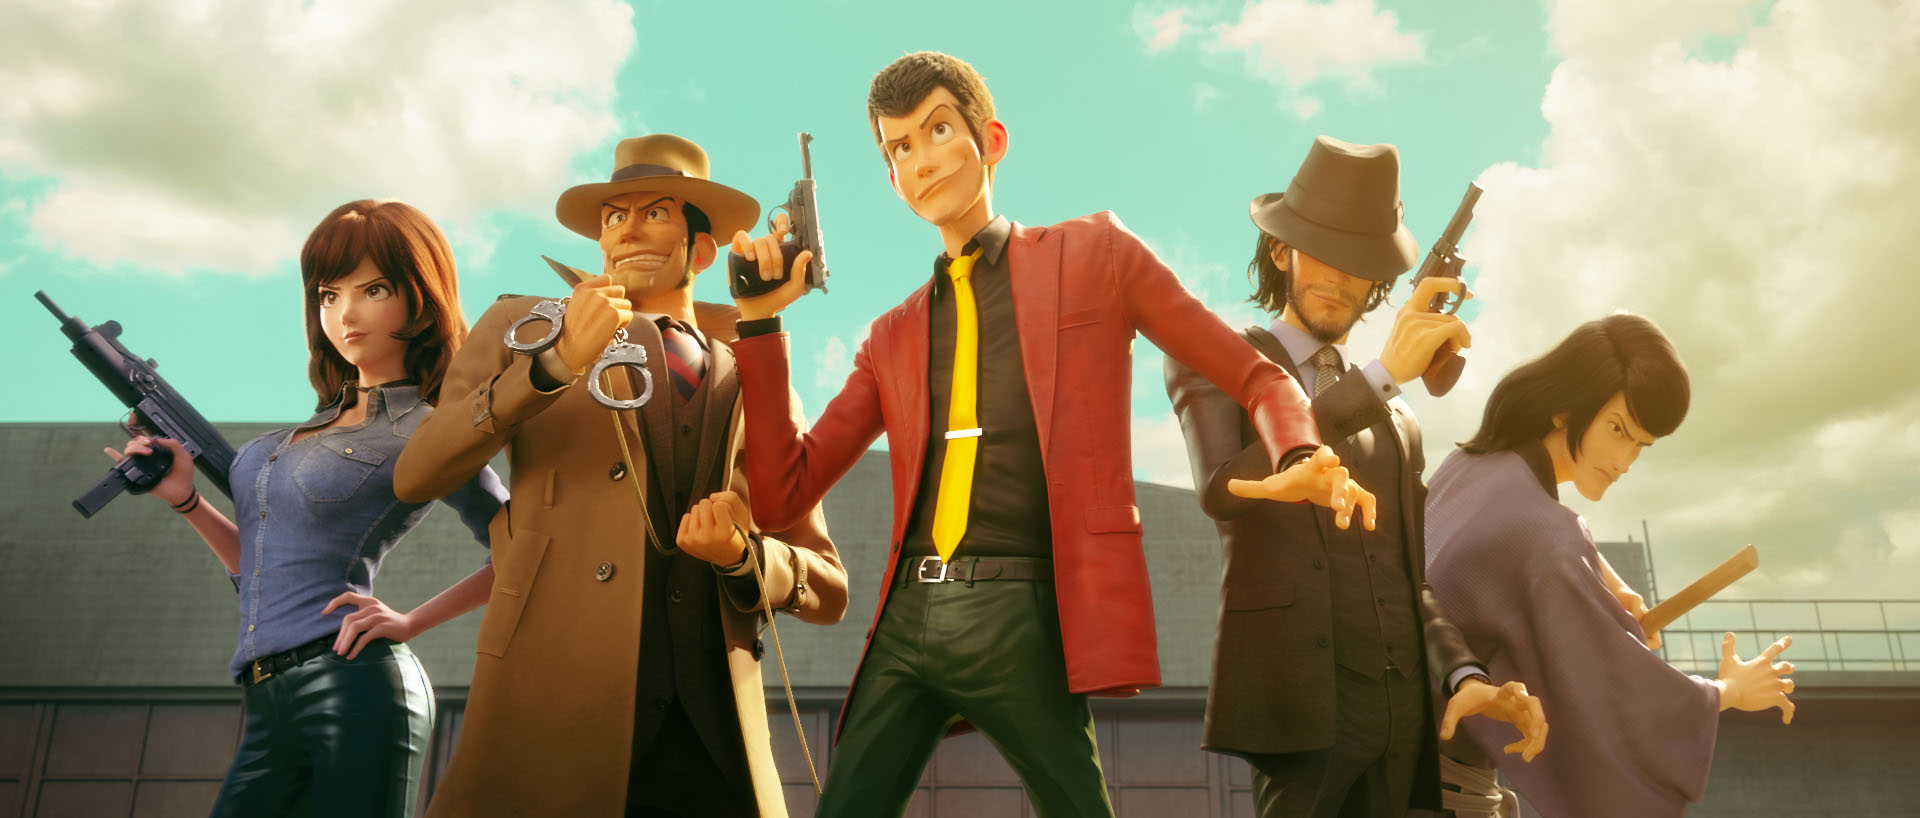 LUPIN THE 3rd: THE FIRST"Trailer.